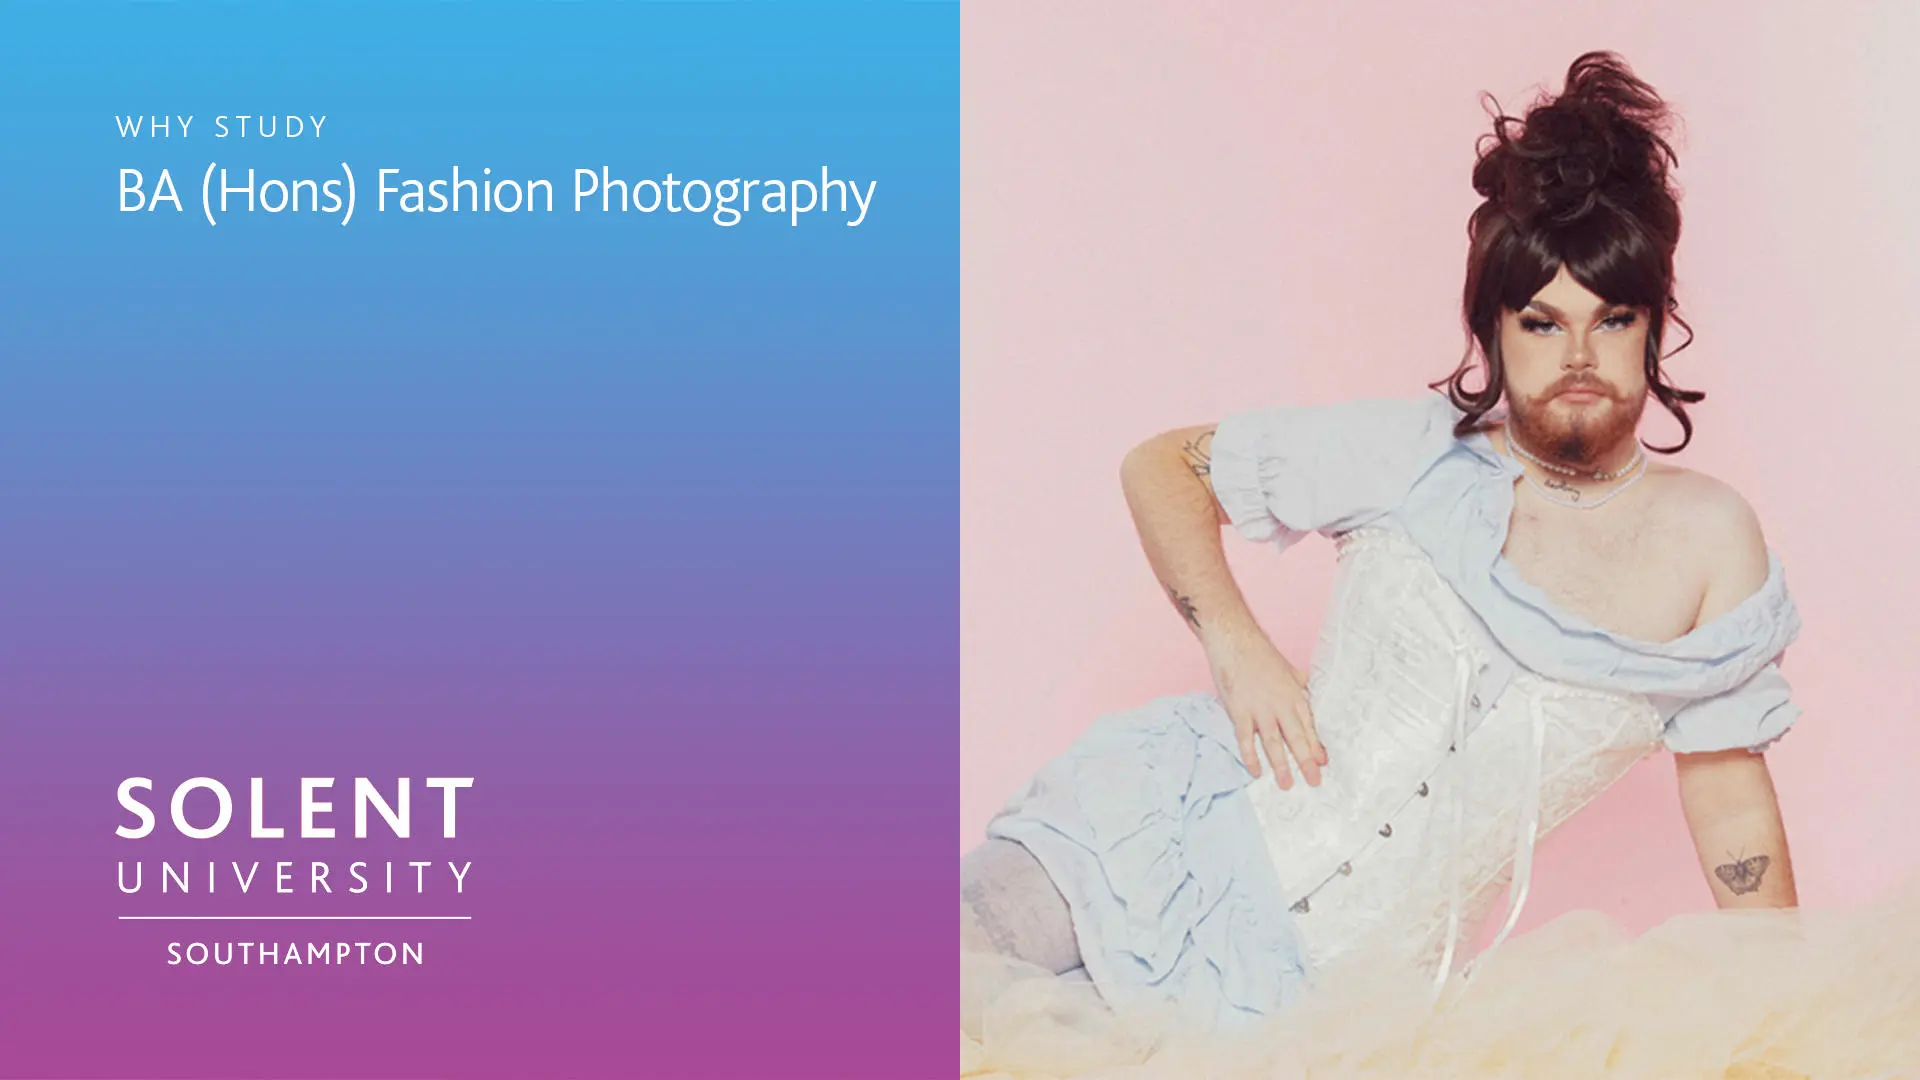 On the left of the screen is a blue to purple gradient (portrait) with white copy over the top which reads 'Why study BA (Hons) Fashion Photography' and the Solent University, Southampton logo bottom left. To the right is a photo of a model posing.